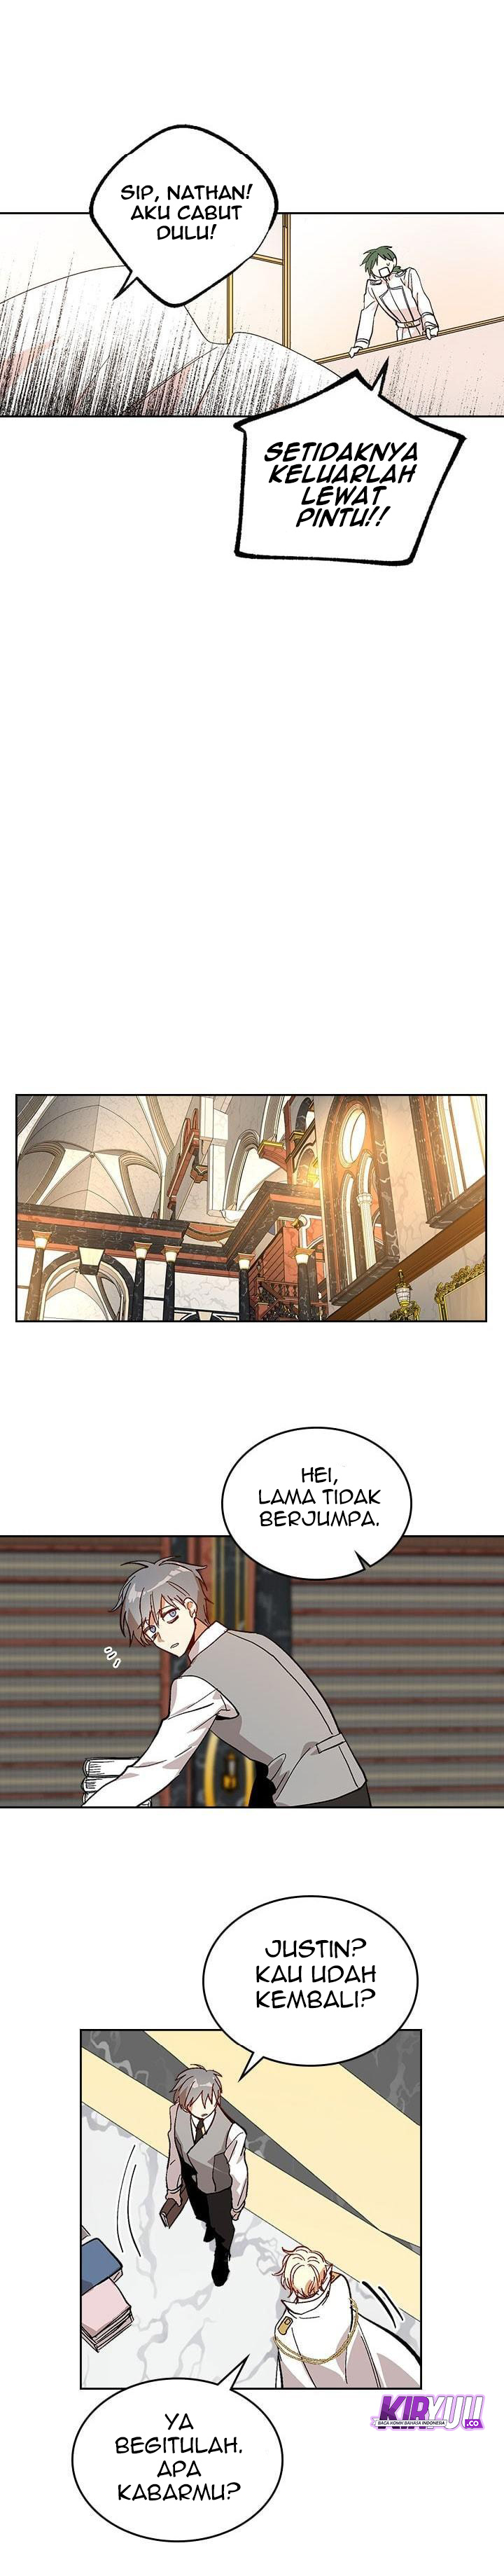 The Reason Why Raeliana Ended up at the Duke’s Mansion Chapter 85